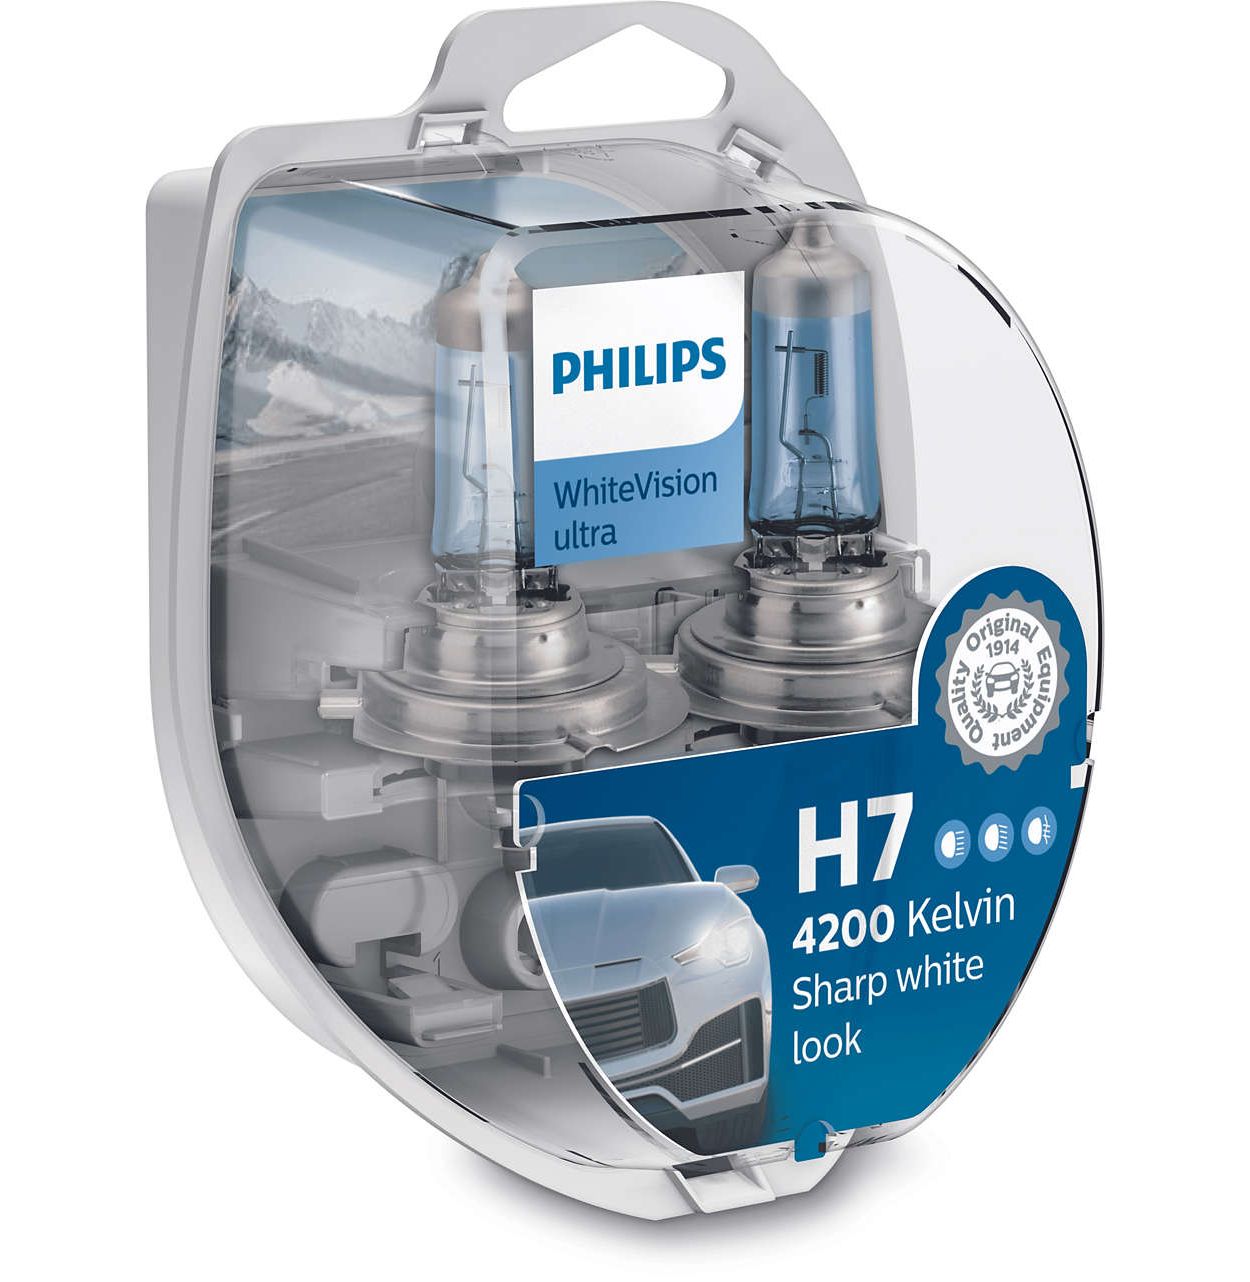 https://images.philips.com/is/image/philipsconsumer/e37499a1957247b5b208afab00d048c2?$jpglarge$&wid=1250